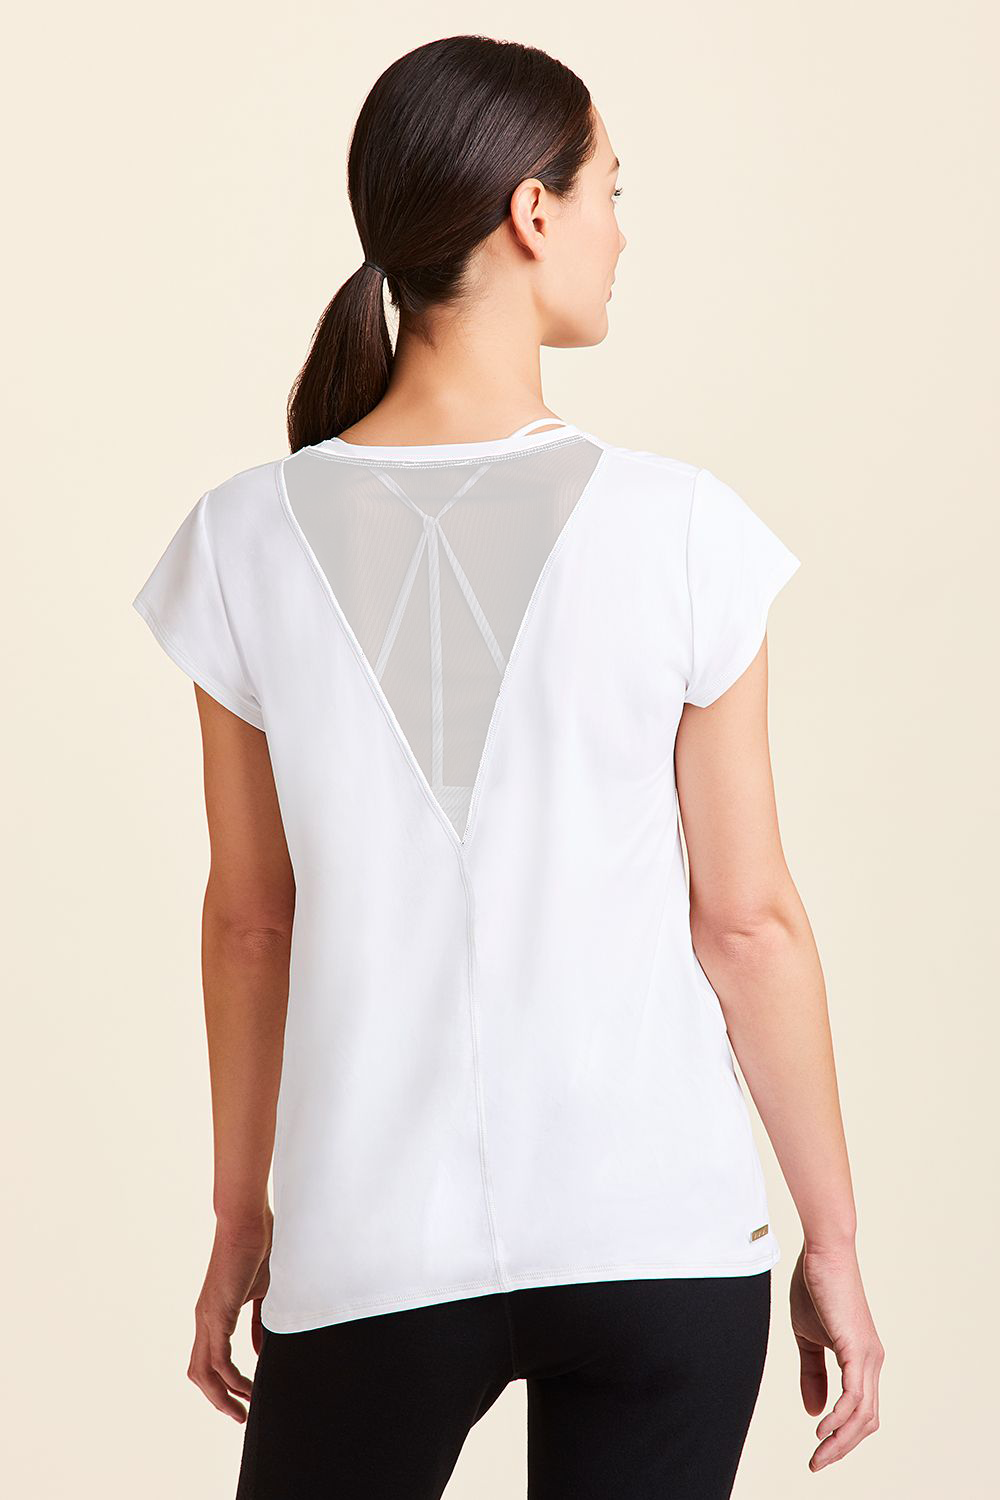 Alala women's tshirt with mesh in white